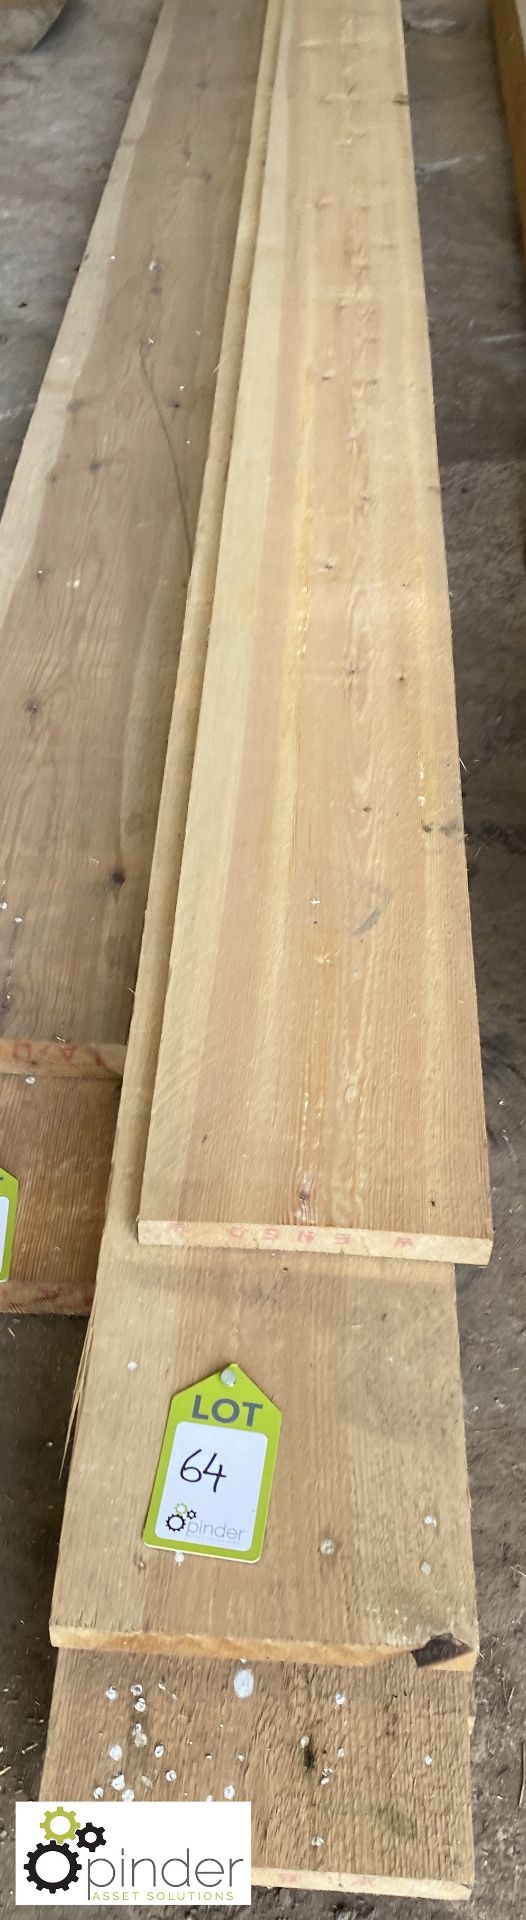 6 Pine Boards, 4800mm average x 225mm x 25mm - Image 2 of 8